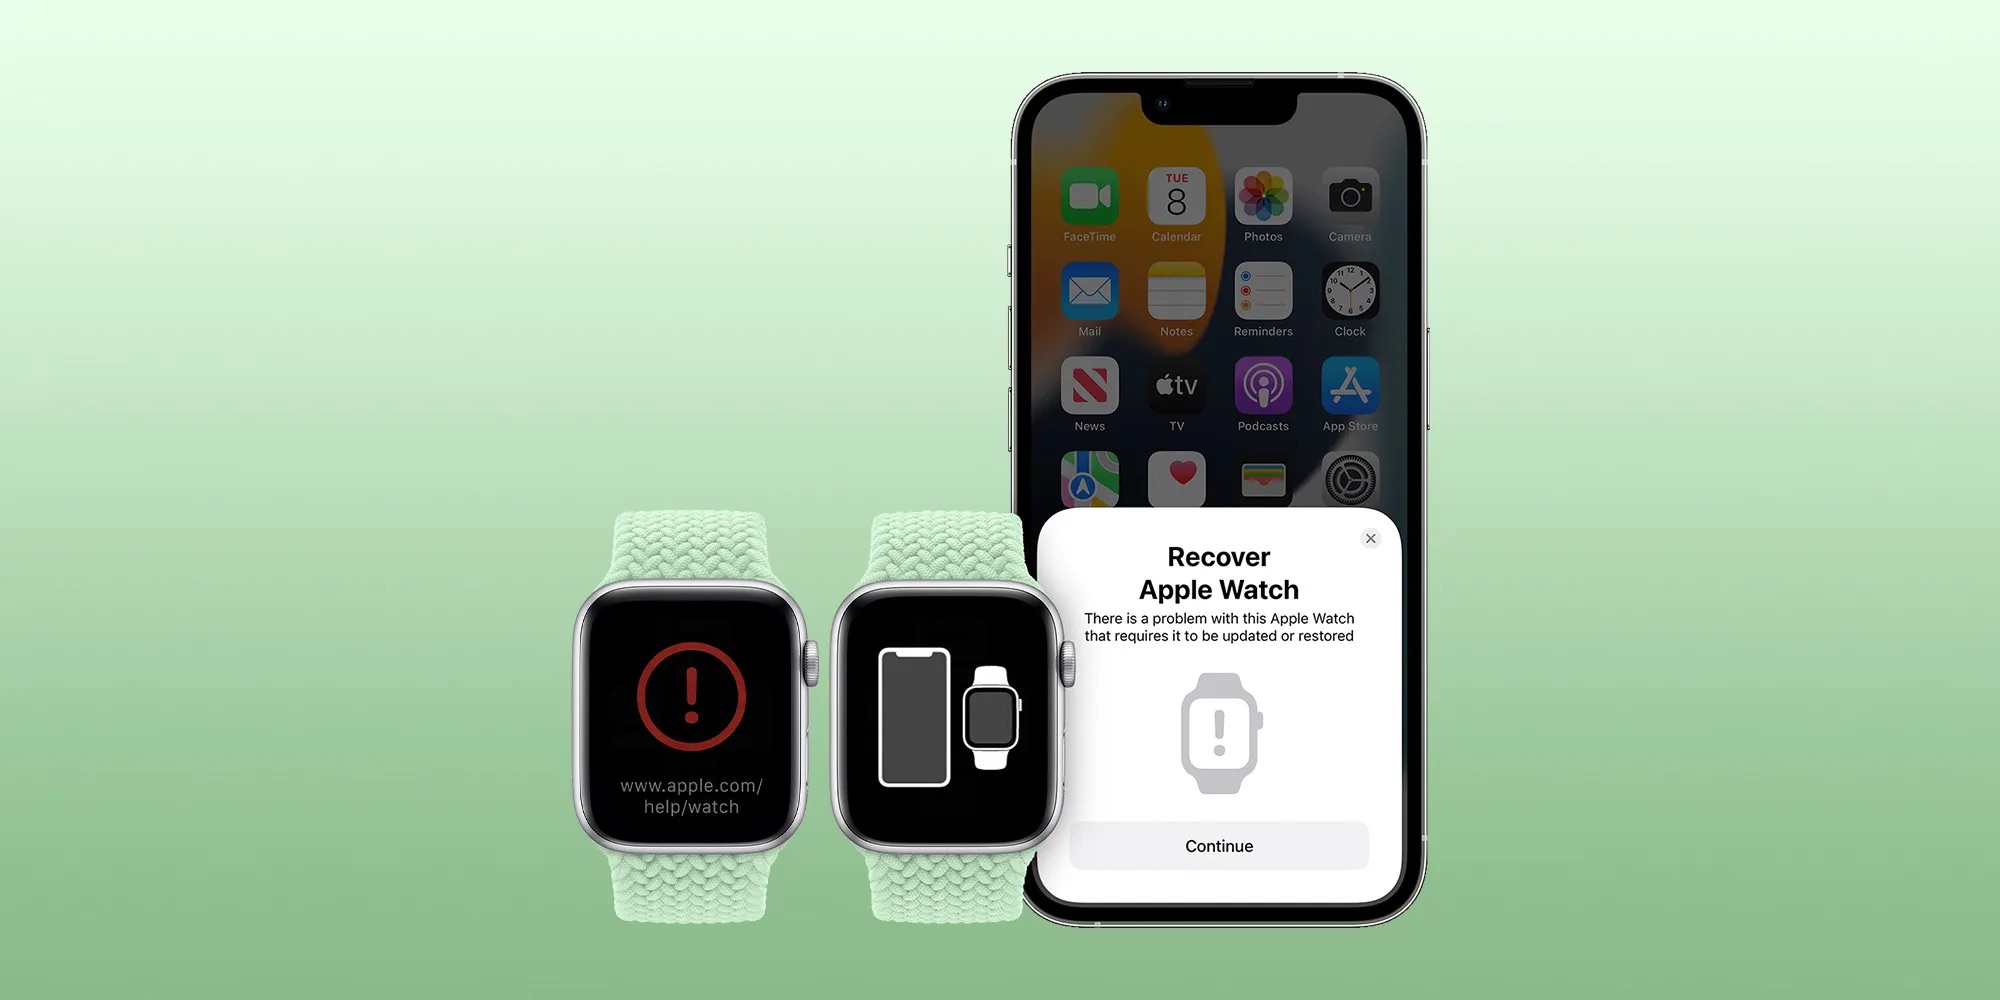 How to restore Apple Watch with iPhone